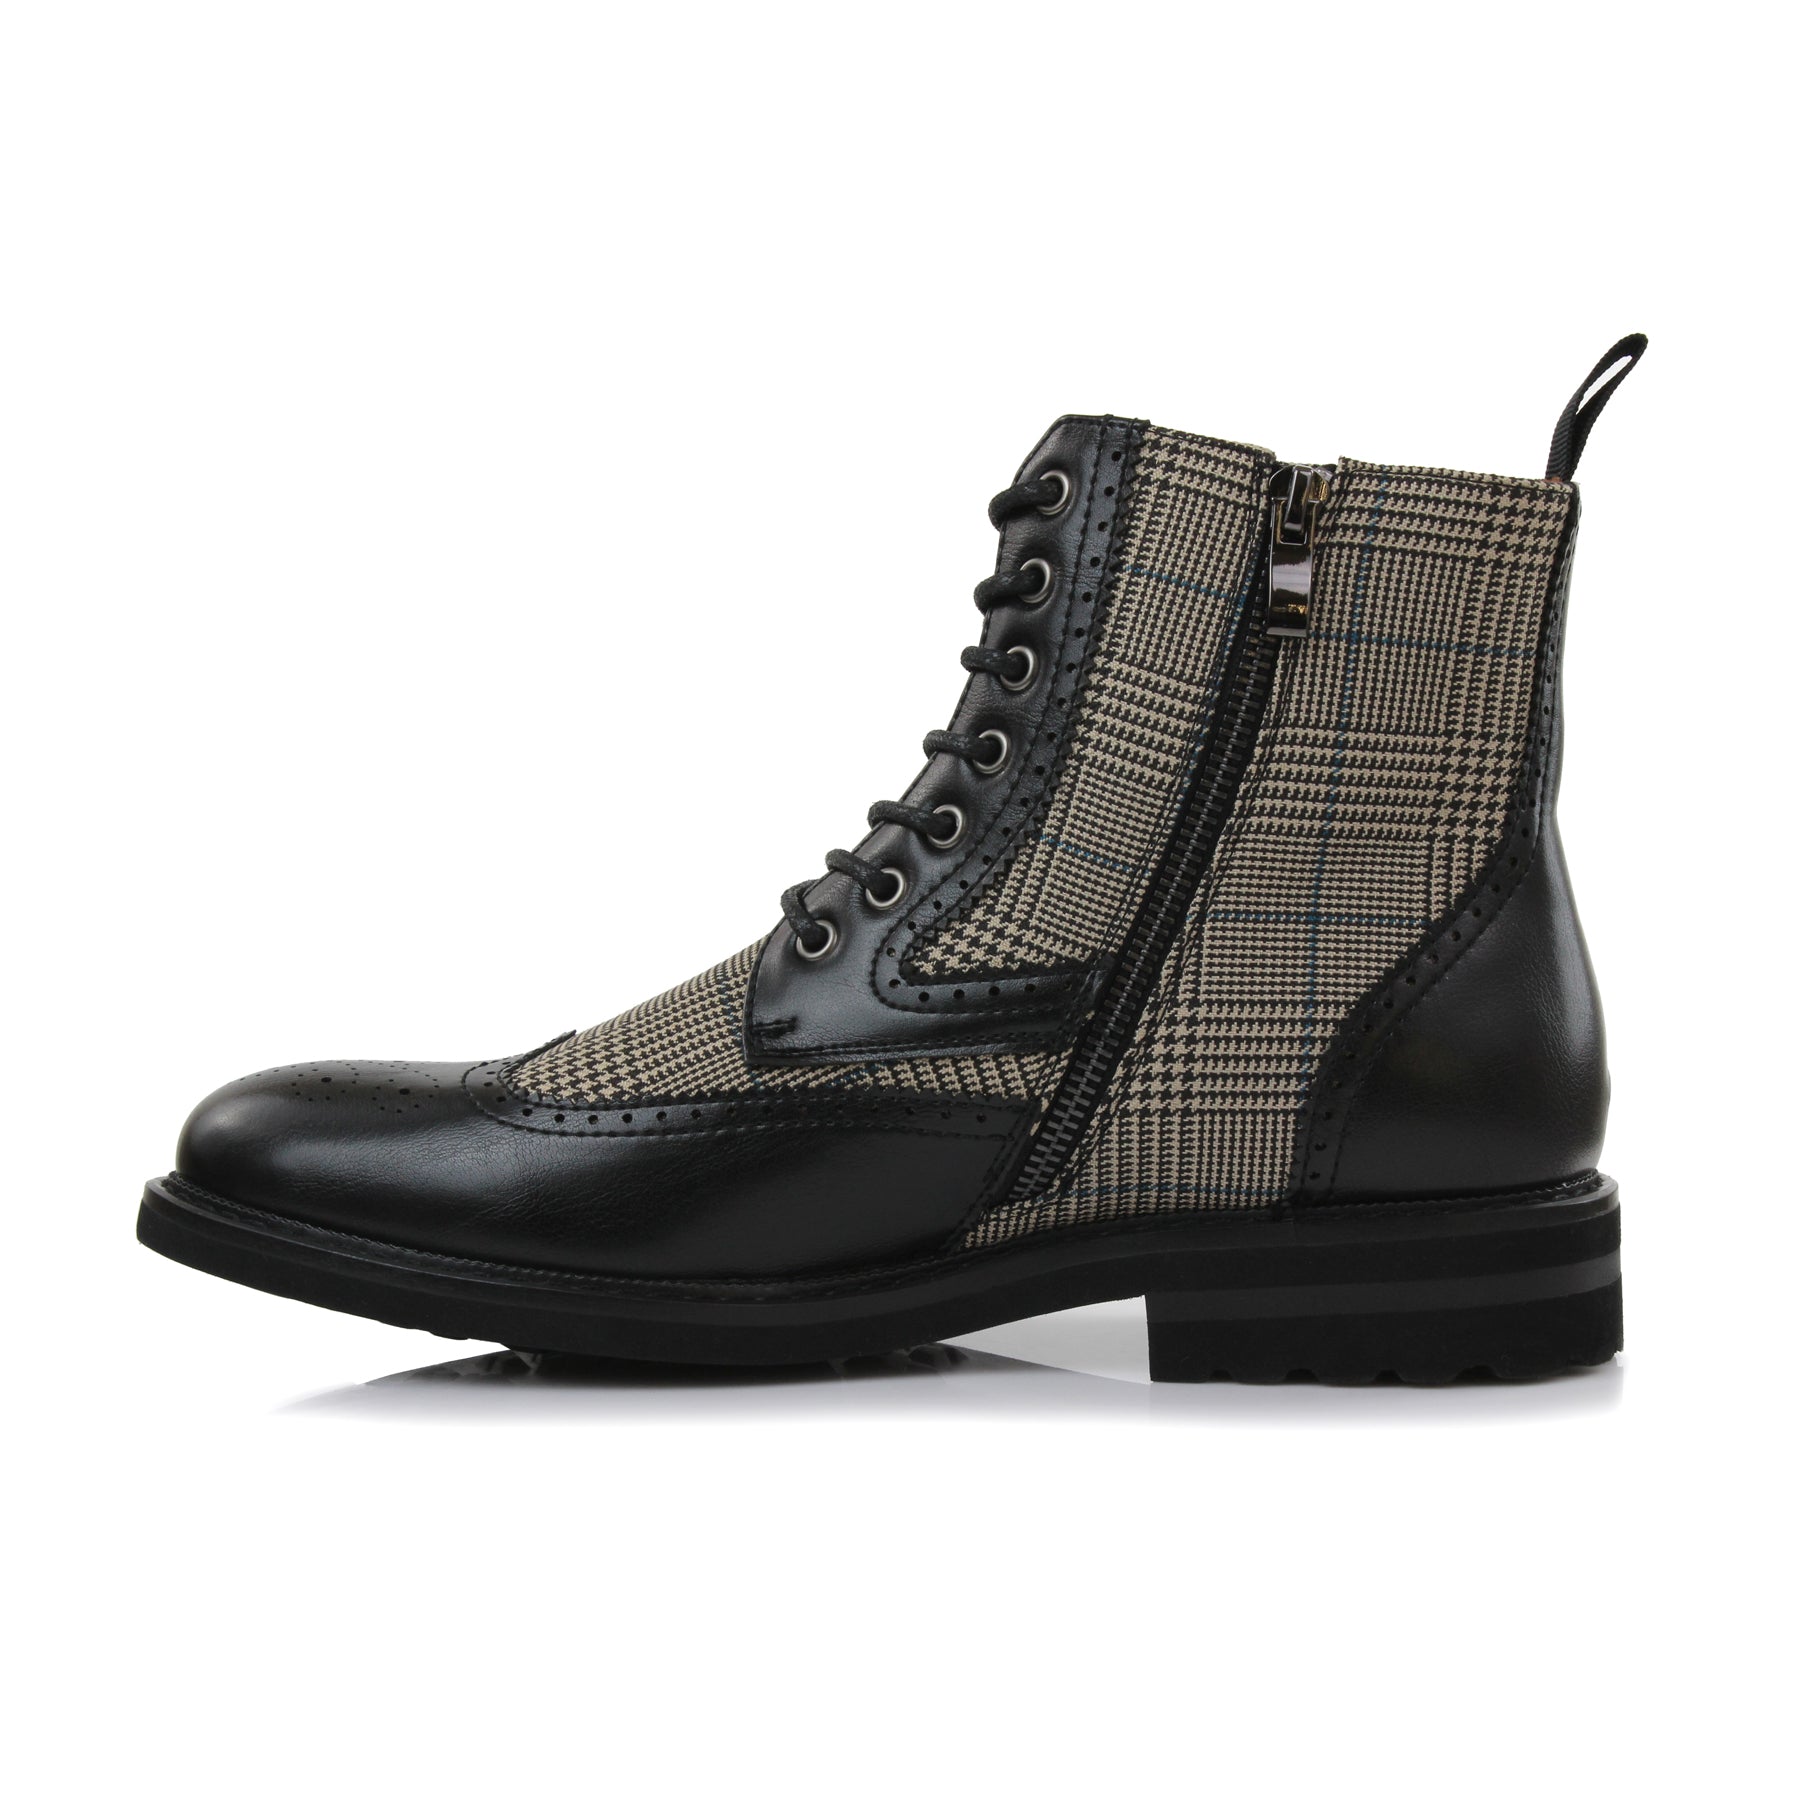 Plaid Brogue Wingtip Boots | Manchester by Polar Fox | Conal Footwear | Inner Side Angle View